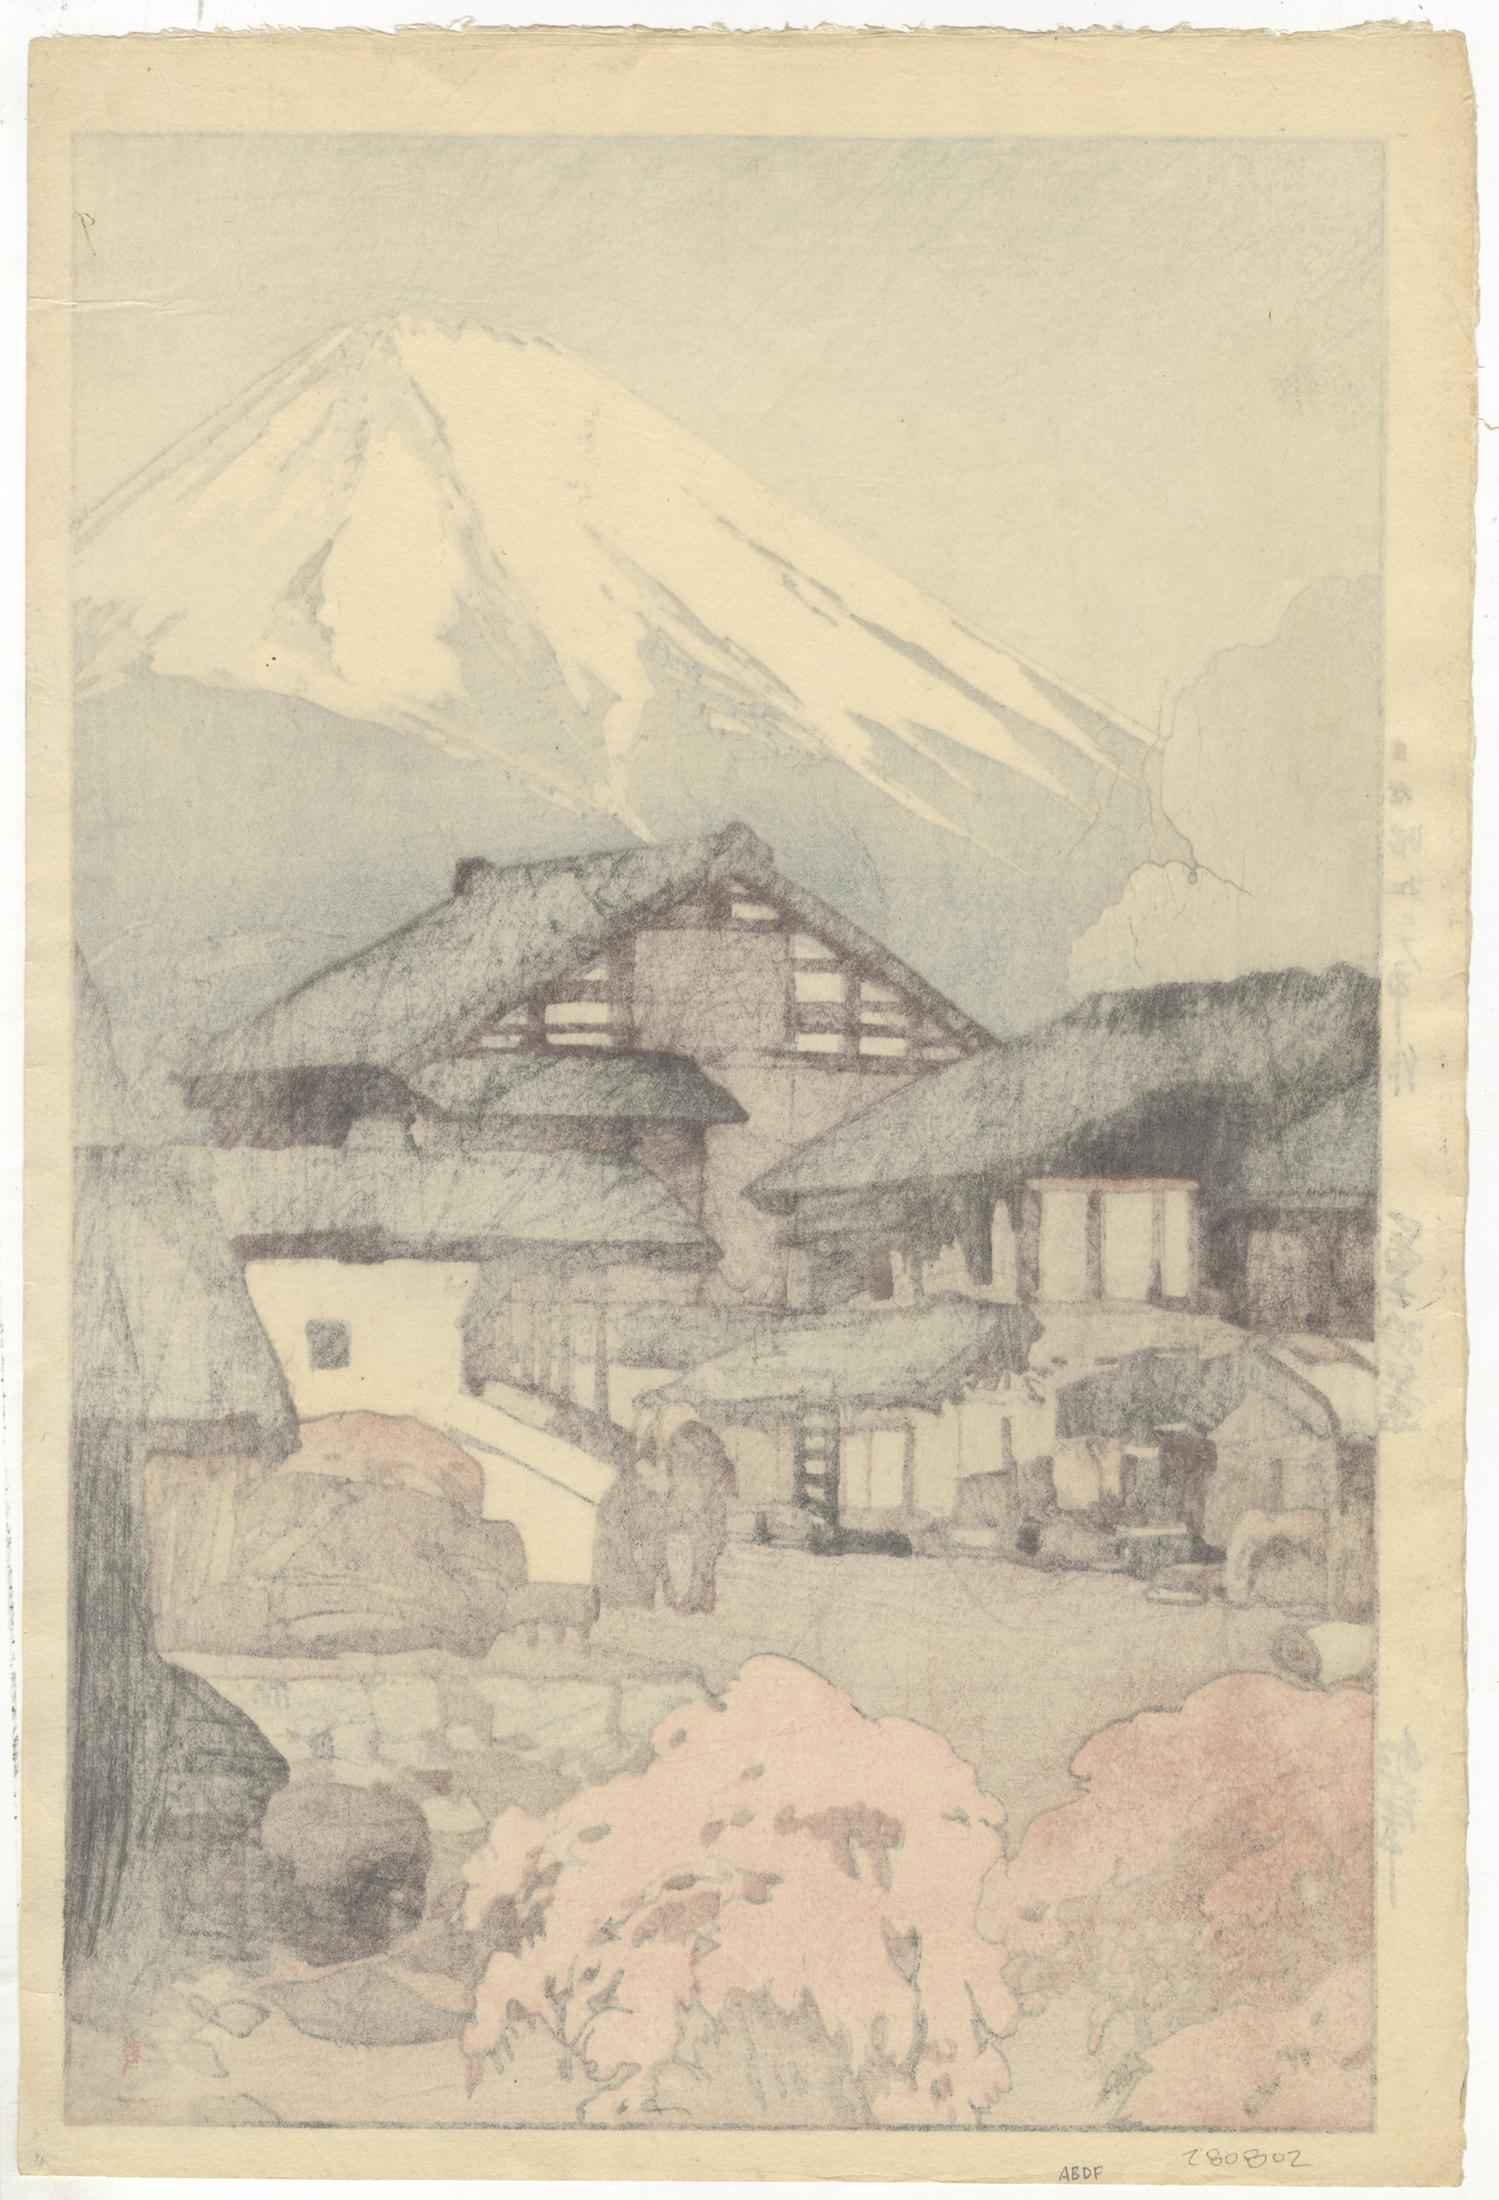 Artist: Hiroshi Yoshida (1876-1950)
Title: Fuji from Funatsu
Series: Ten Views of Fuji
Date: 1928
Dimensions: 27.3 x 40.6 cm
Condition: Minor creases. Black pigment in the bottom right corner.

Printed and signed by the artist.

A snow capped Mt